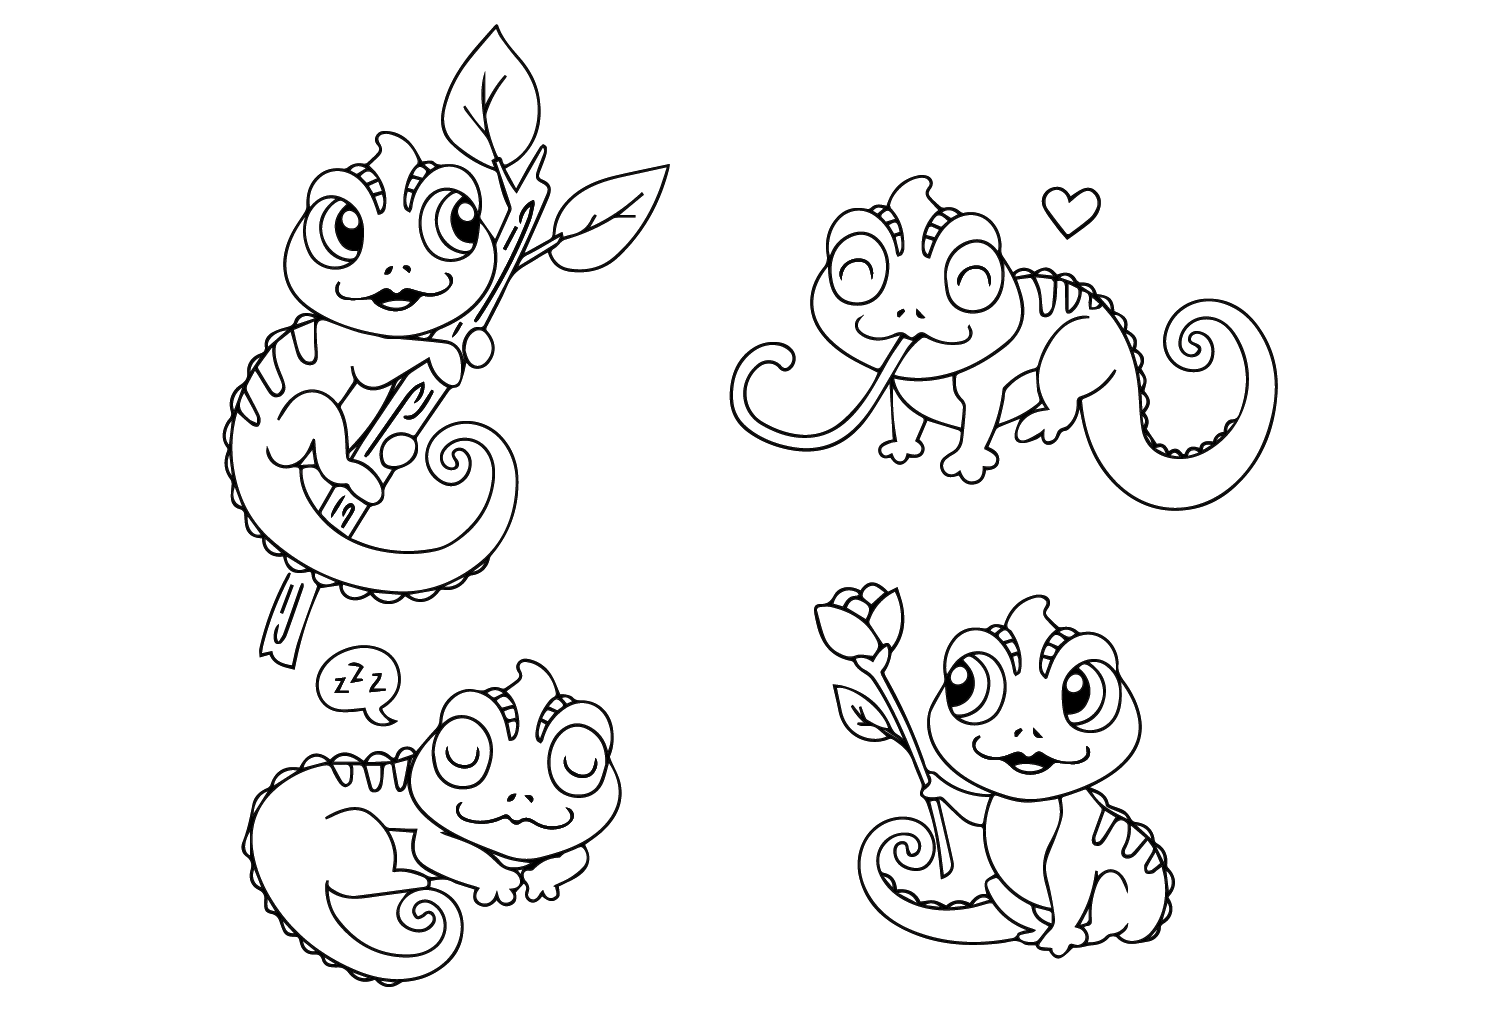 Adorable Chameleon Coloring Page from Chameleon